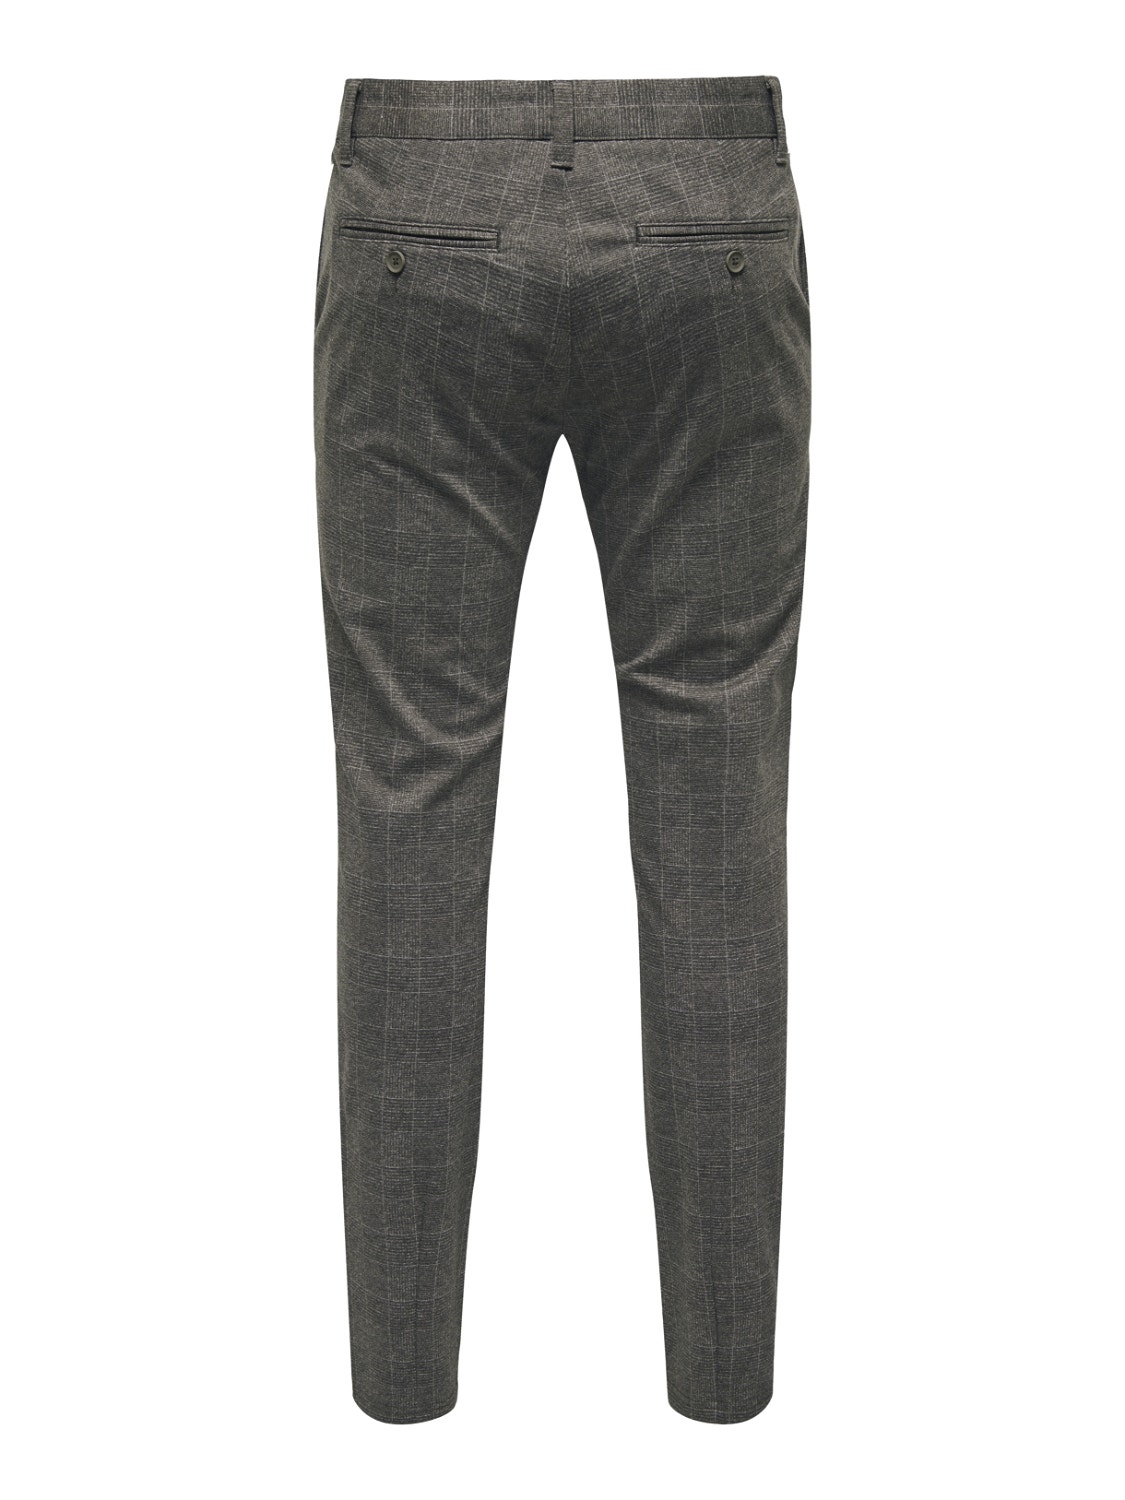 ONLY & SONS Slim Fit Mid waist Trousers -Slate Black - 22019887